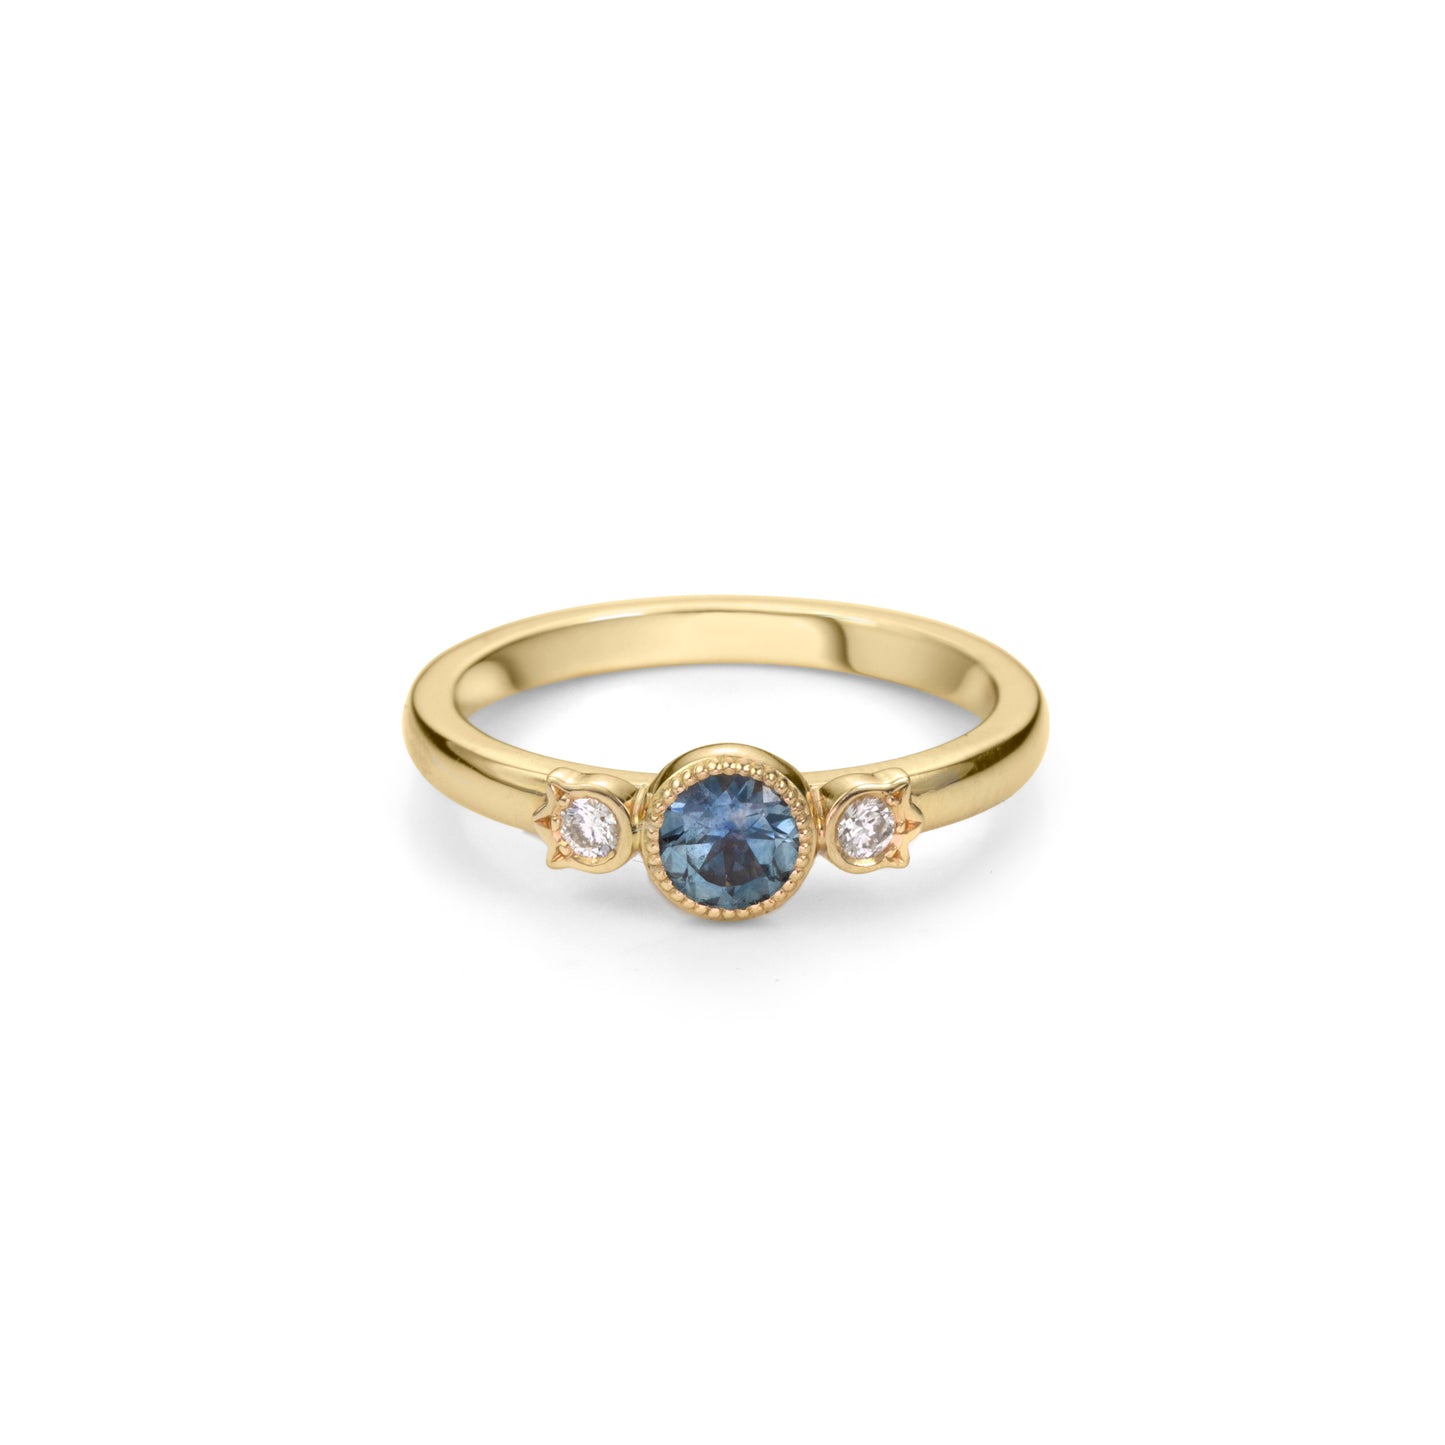 Yellow gold stackable ring with round beaded bezel set Montana blue sapphire and diamonds in flower setting on each side.